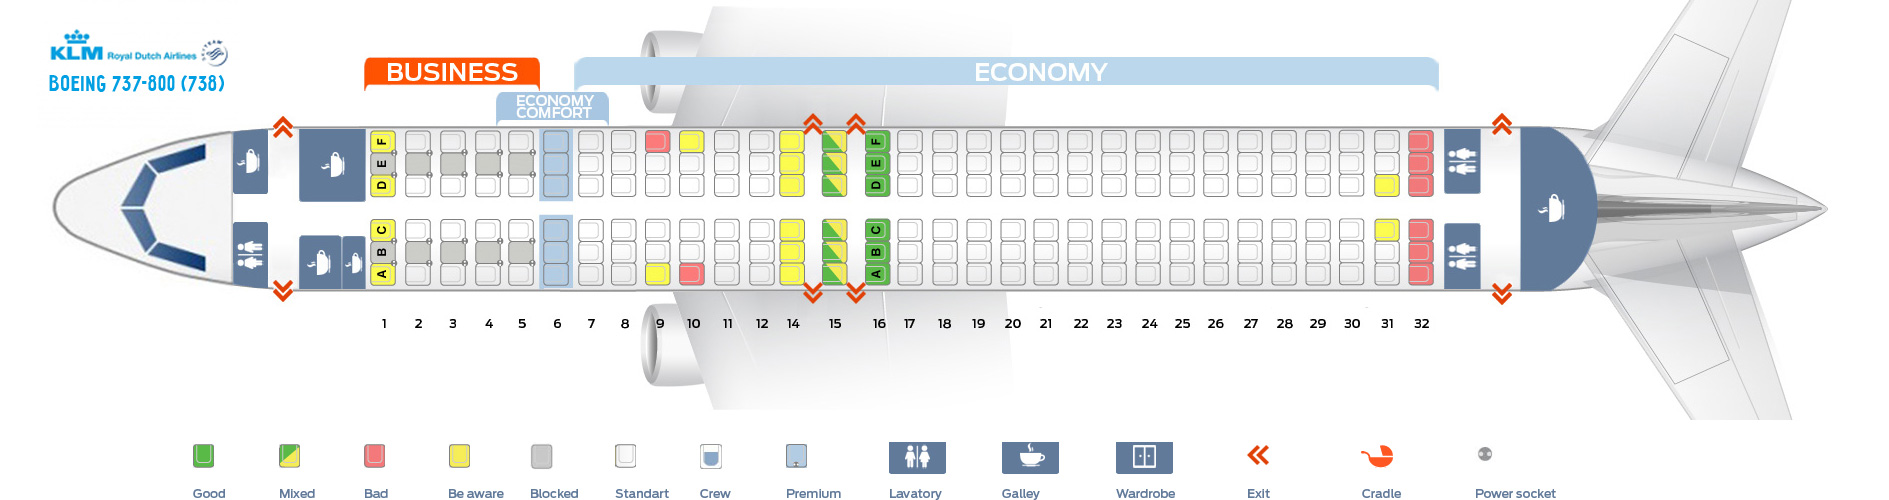 Boeing 737 Seating Chart Klm